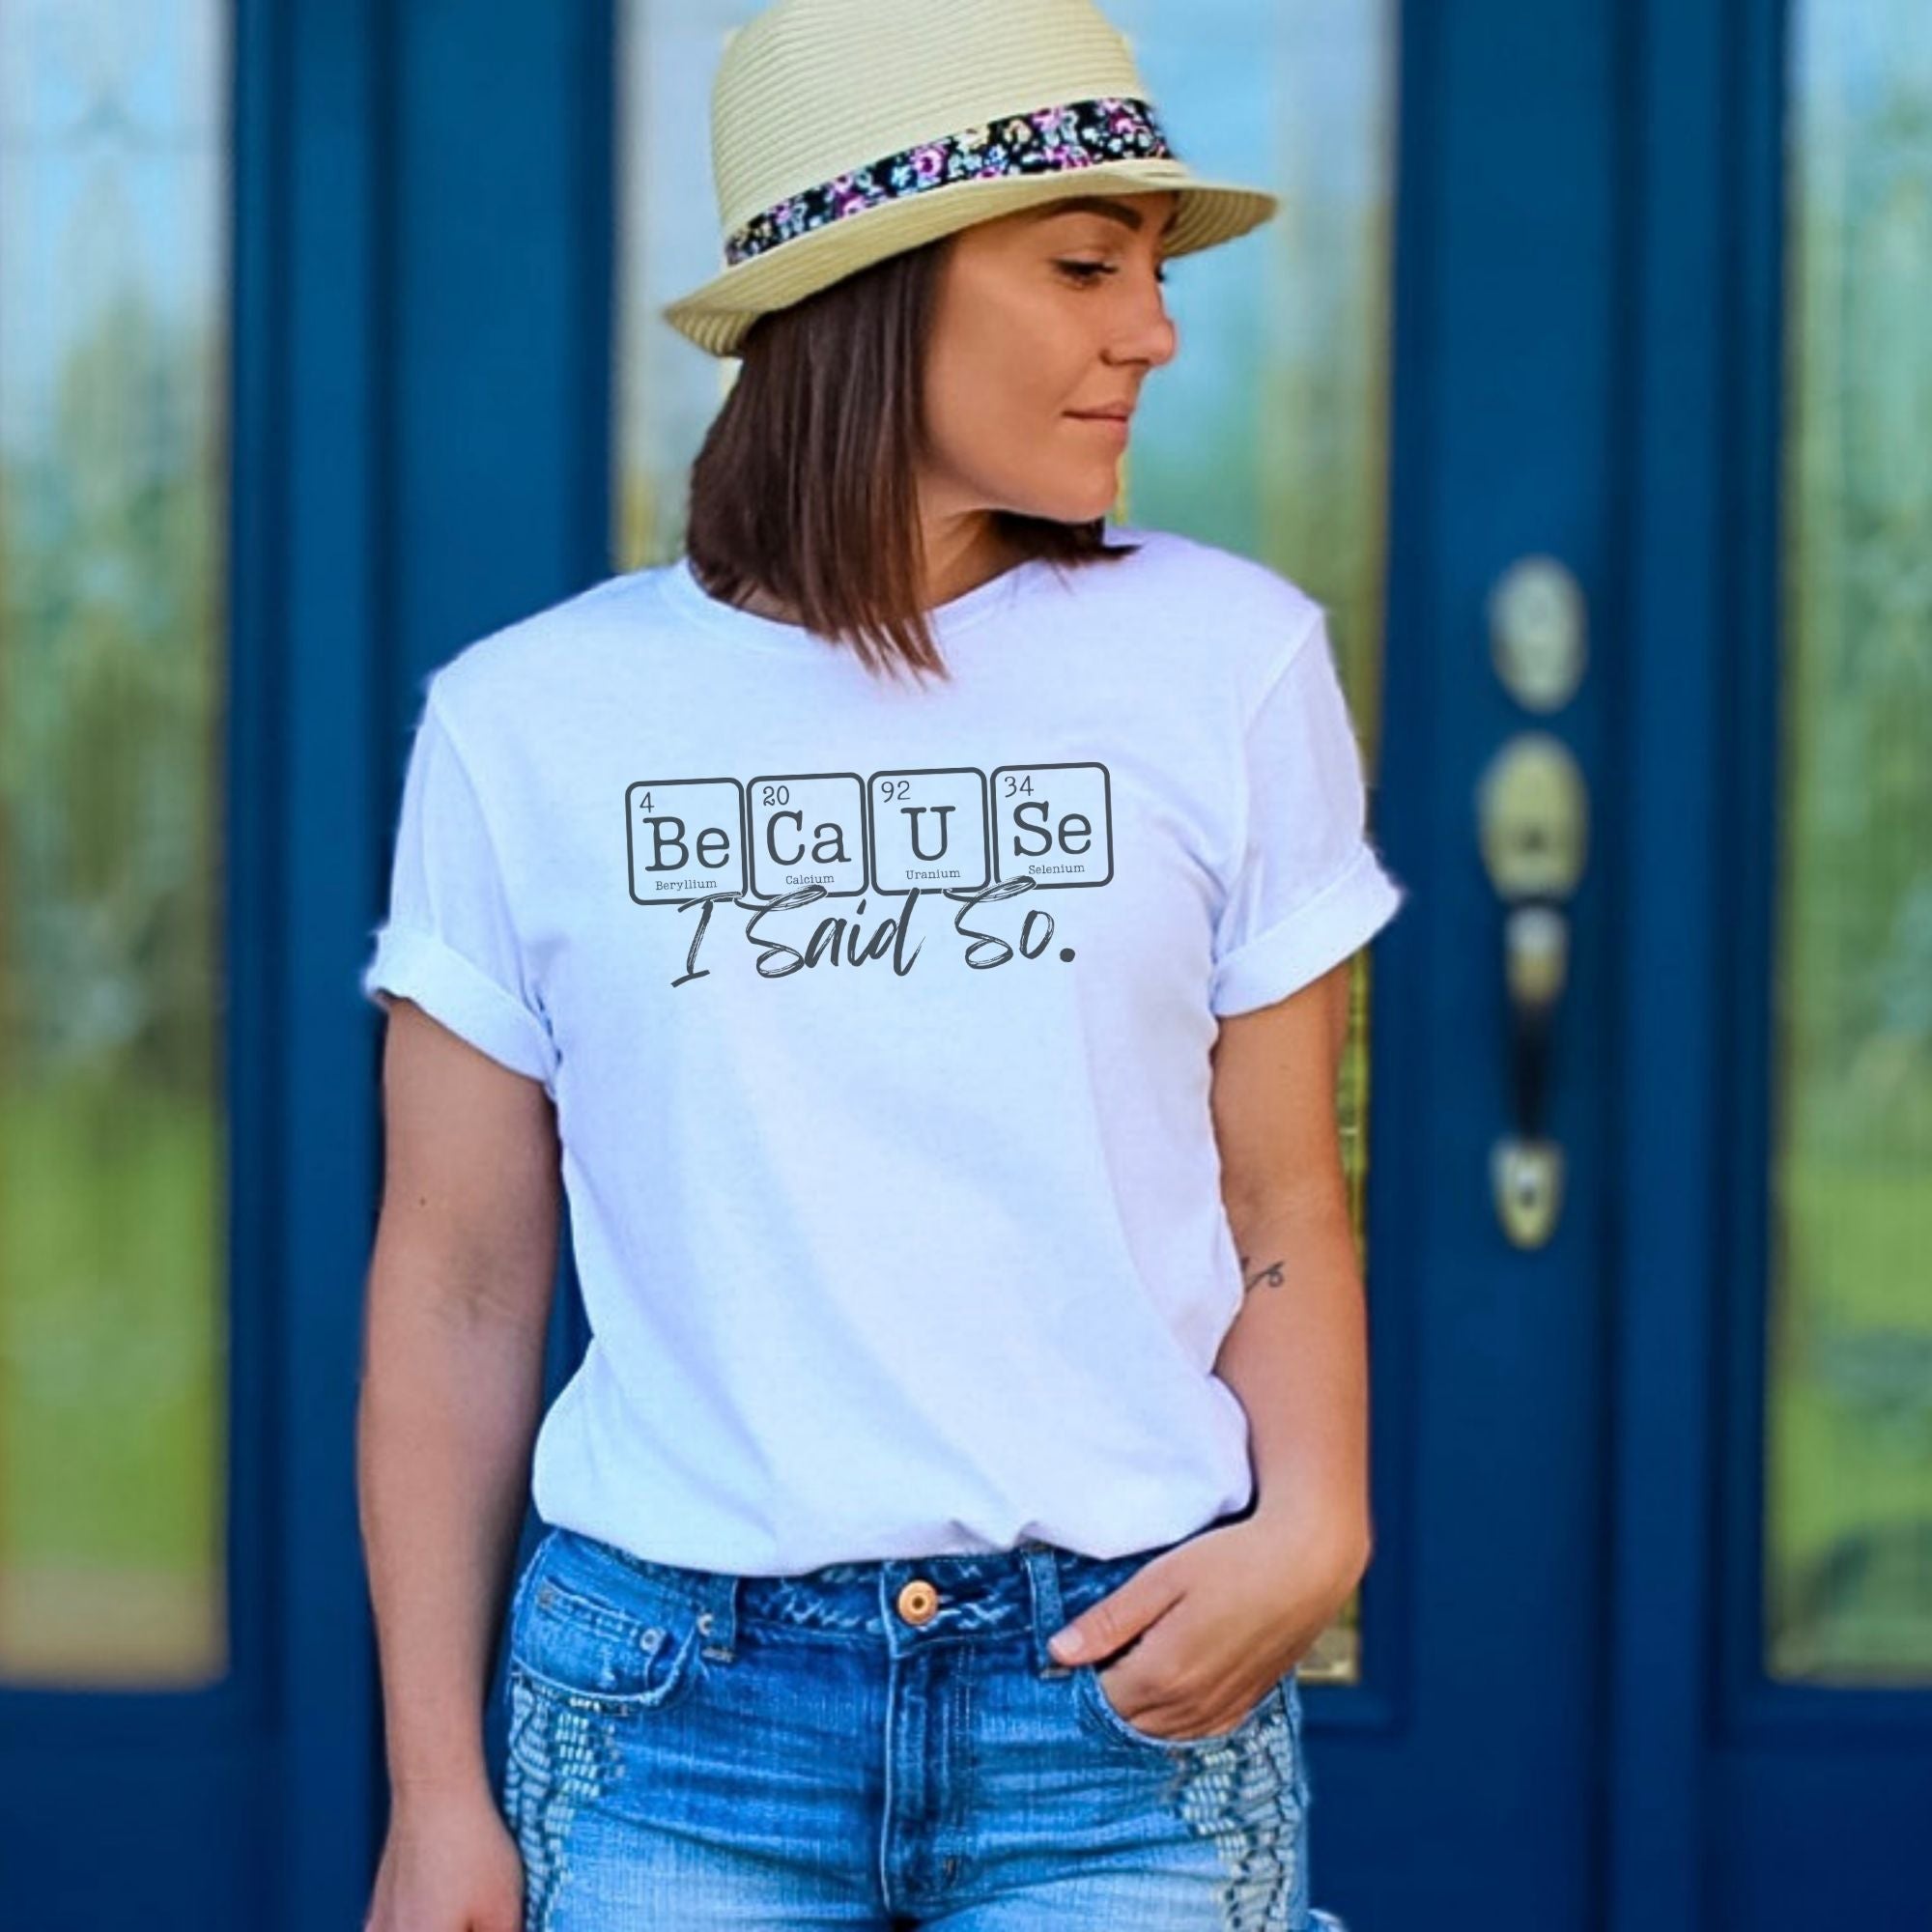 a woman wearing a white t - shirt with periodic table design that says "because I said so", wearing blue jeans and a straw hat